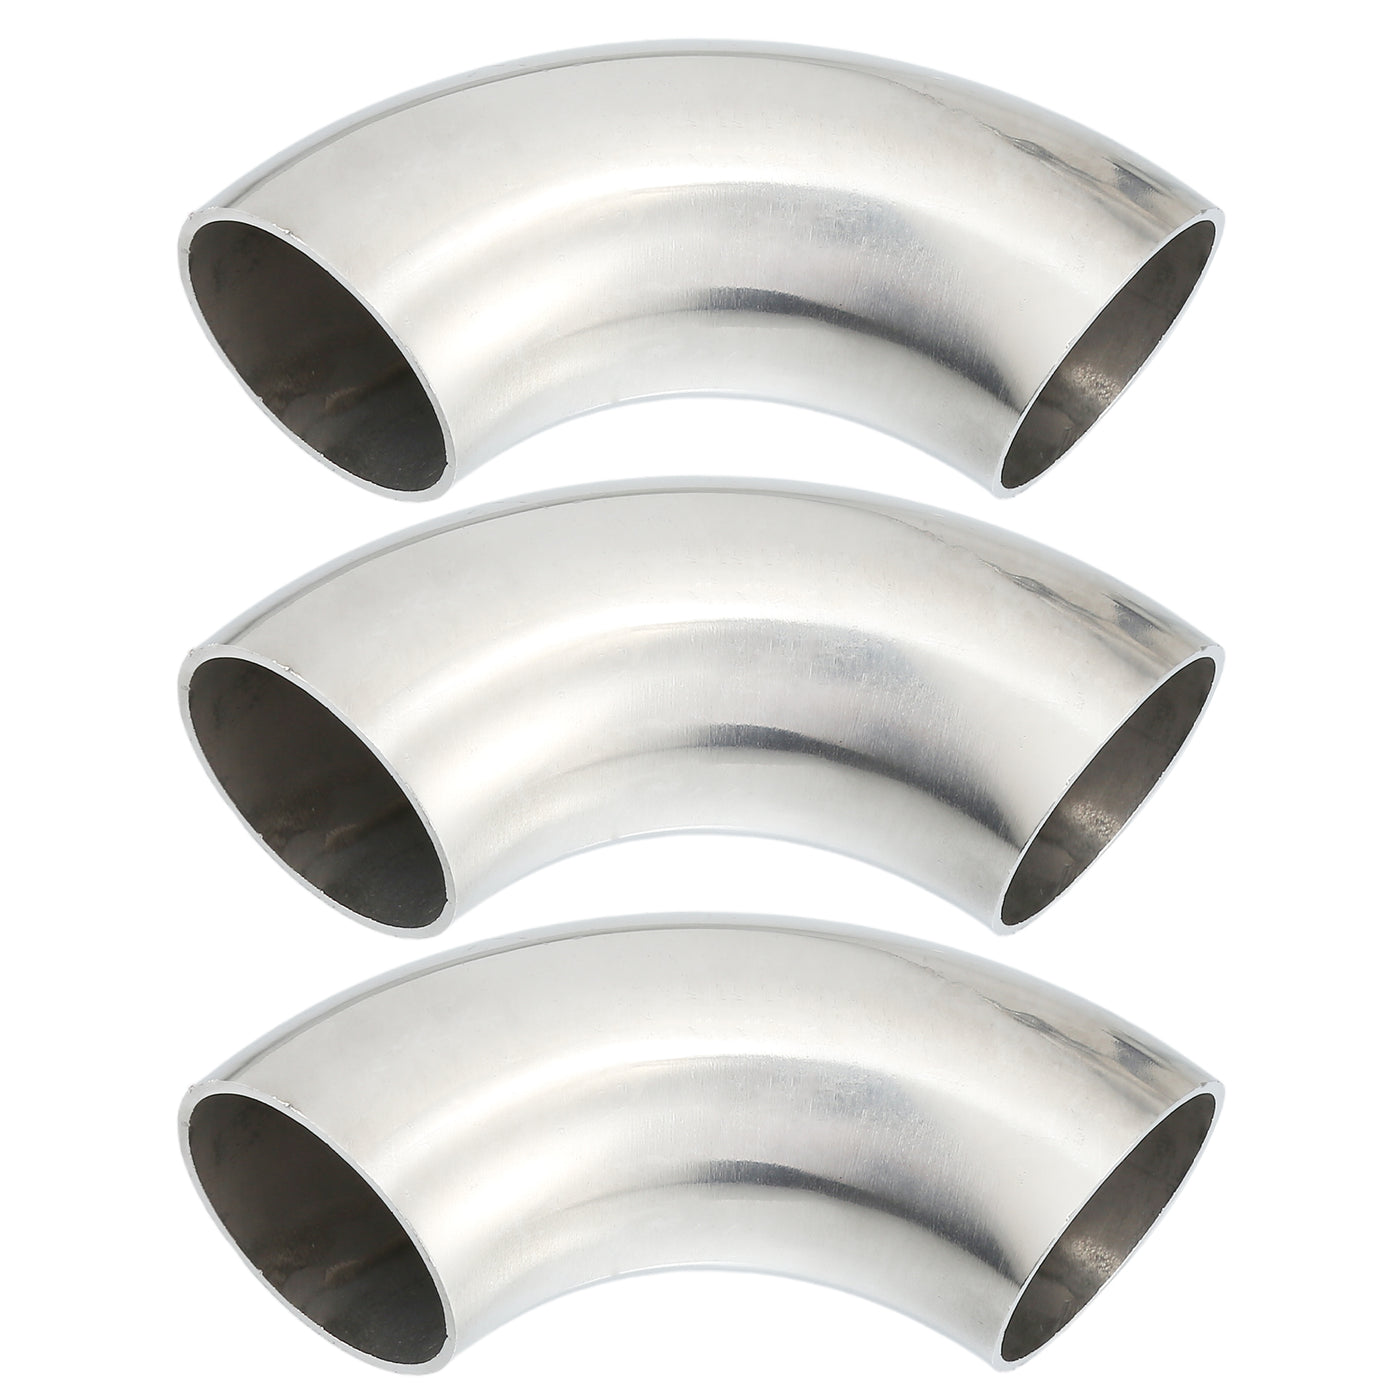 uxcell Uxcell 3pcs 90 Degree Mandrel Bend Elbow SS304 Stainless Steel Bend Tube Exhaust Elbow Pipe for Car Arc Length 120mm Silver Tone